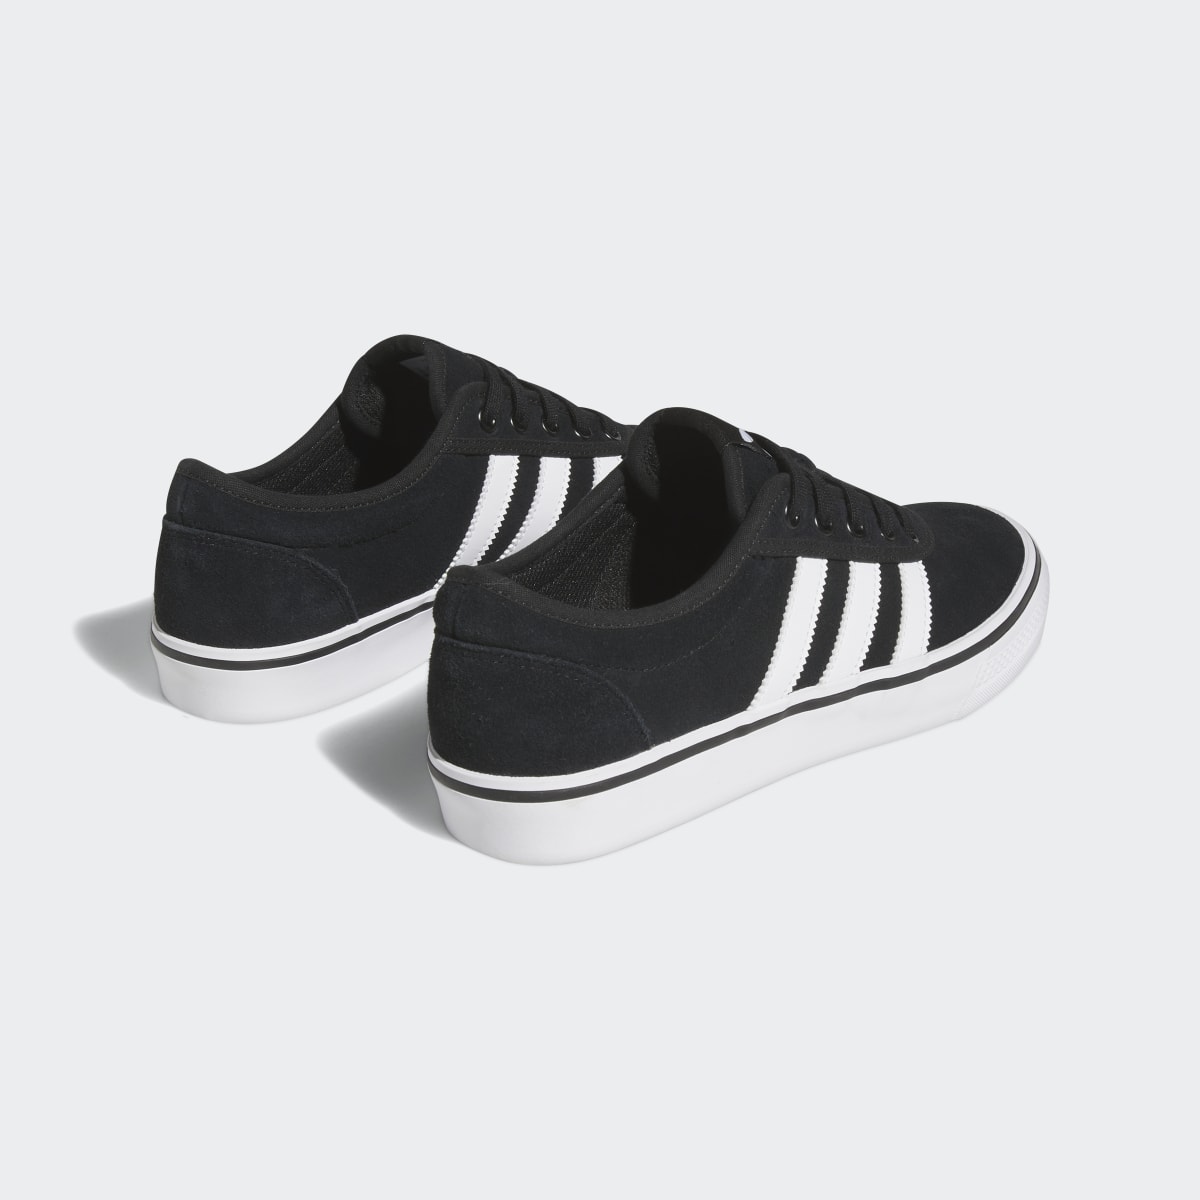 Adidas Adiease Shoes. 6